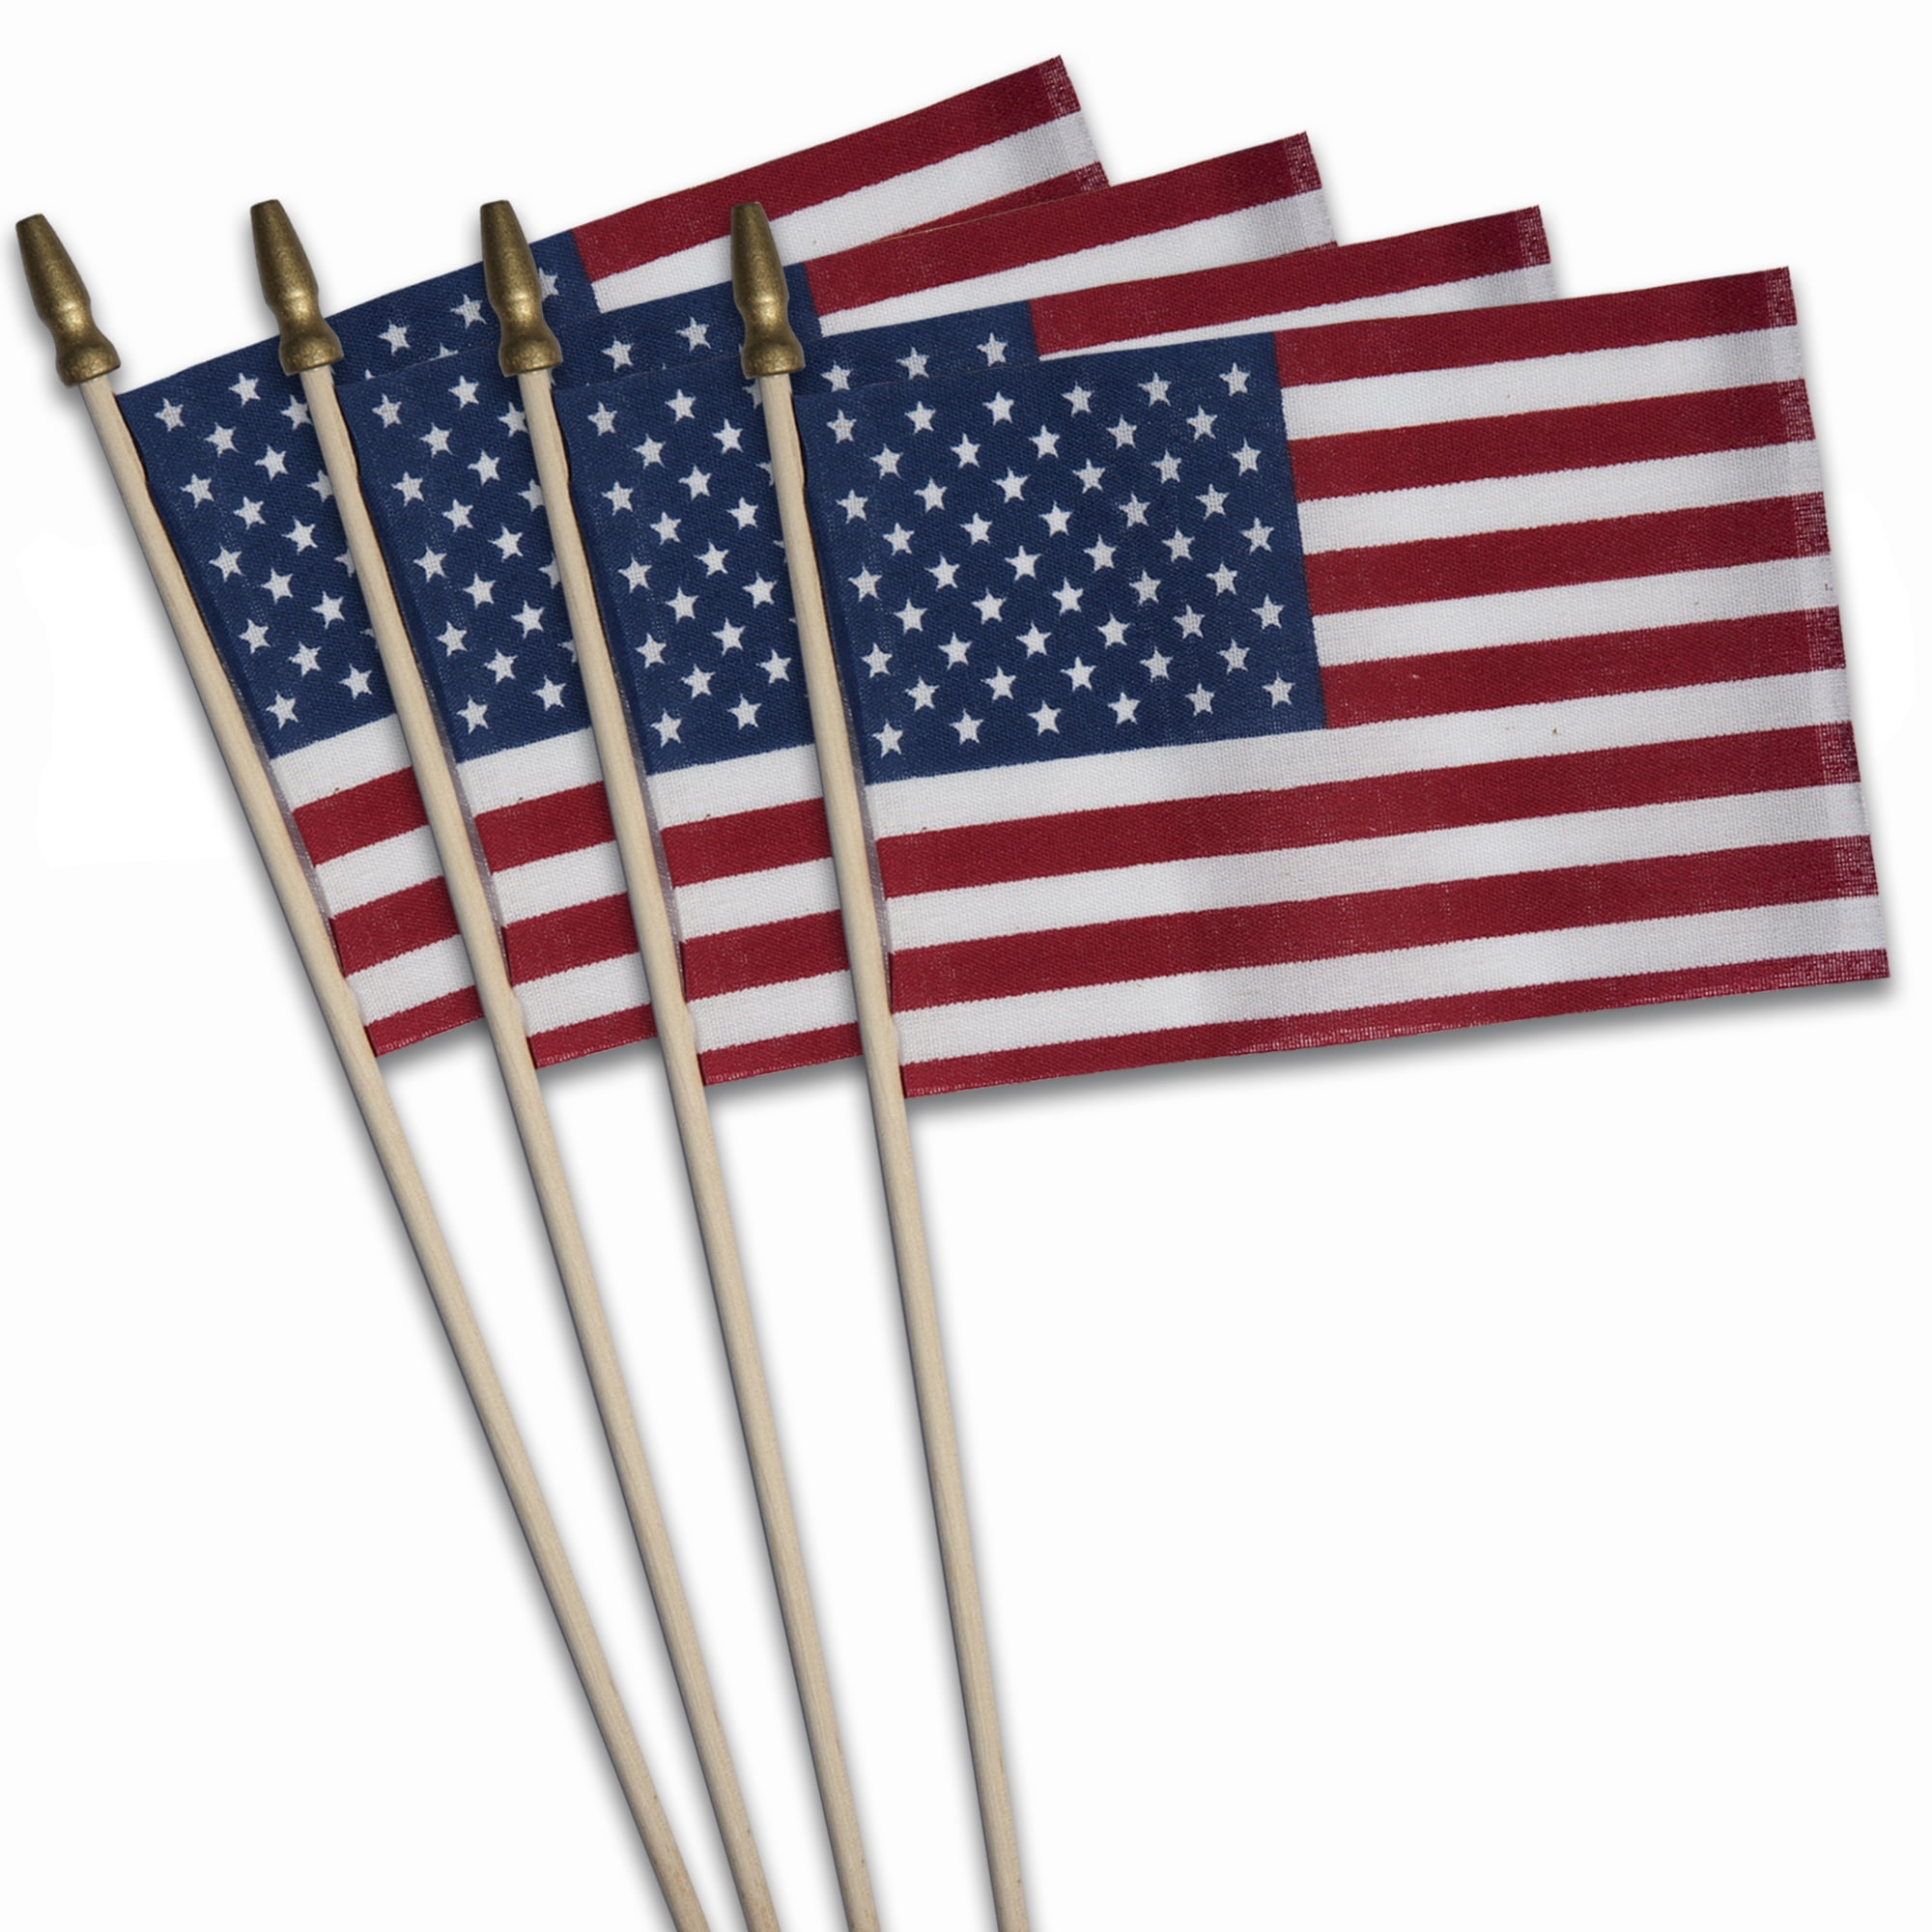 2 AMERICAN 11  X 18 IN FLAGS ON STICK flag usa banners 